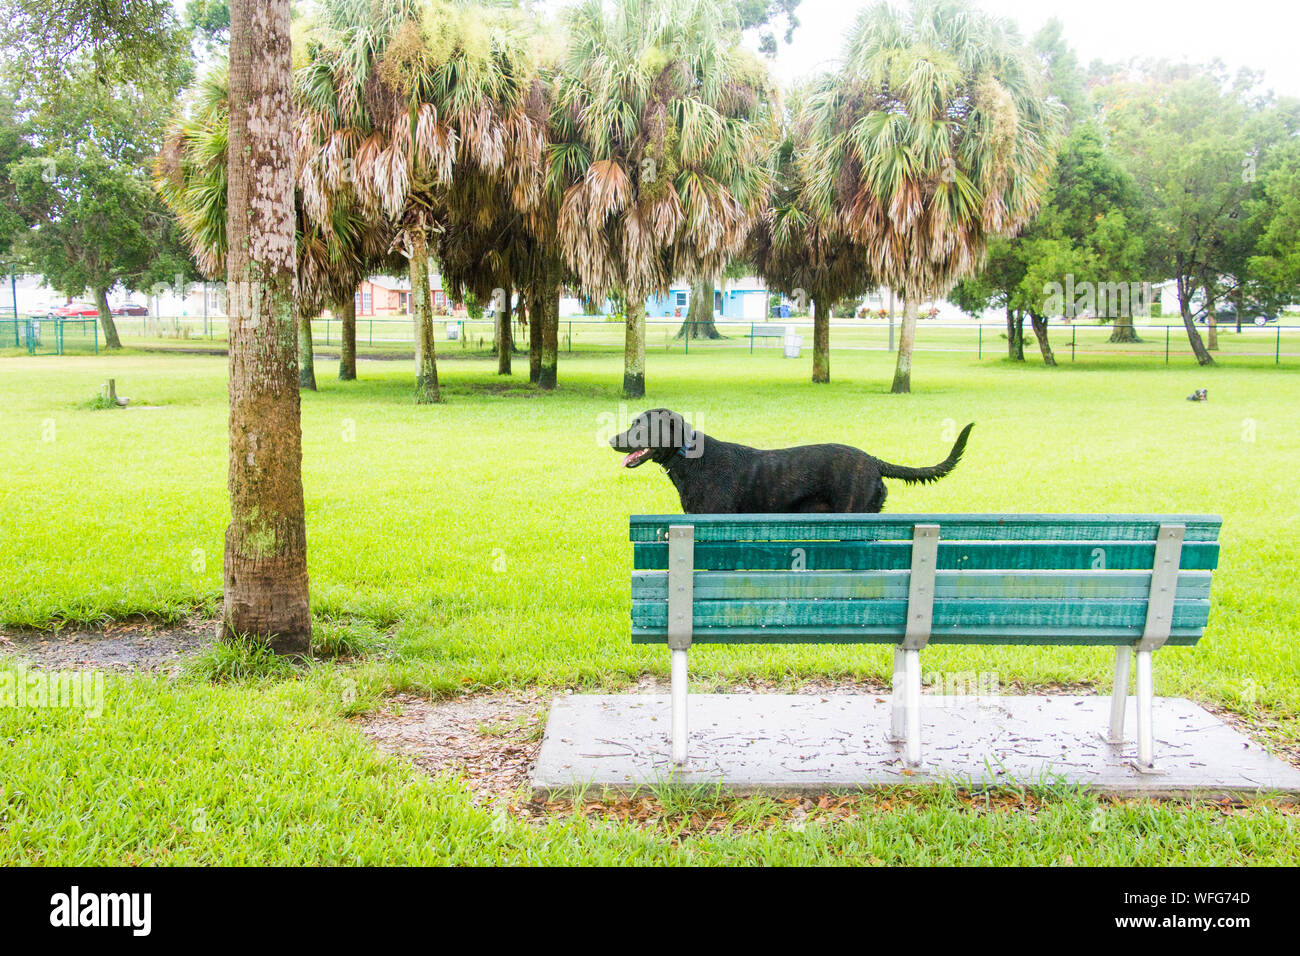 Labrador Dog standing on a bench in a dog park, United States Stock Photo